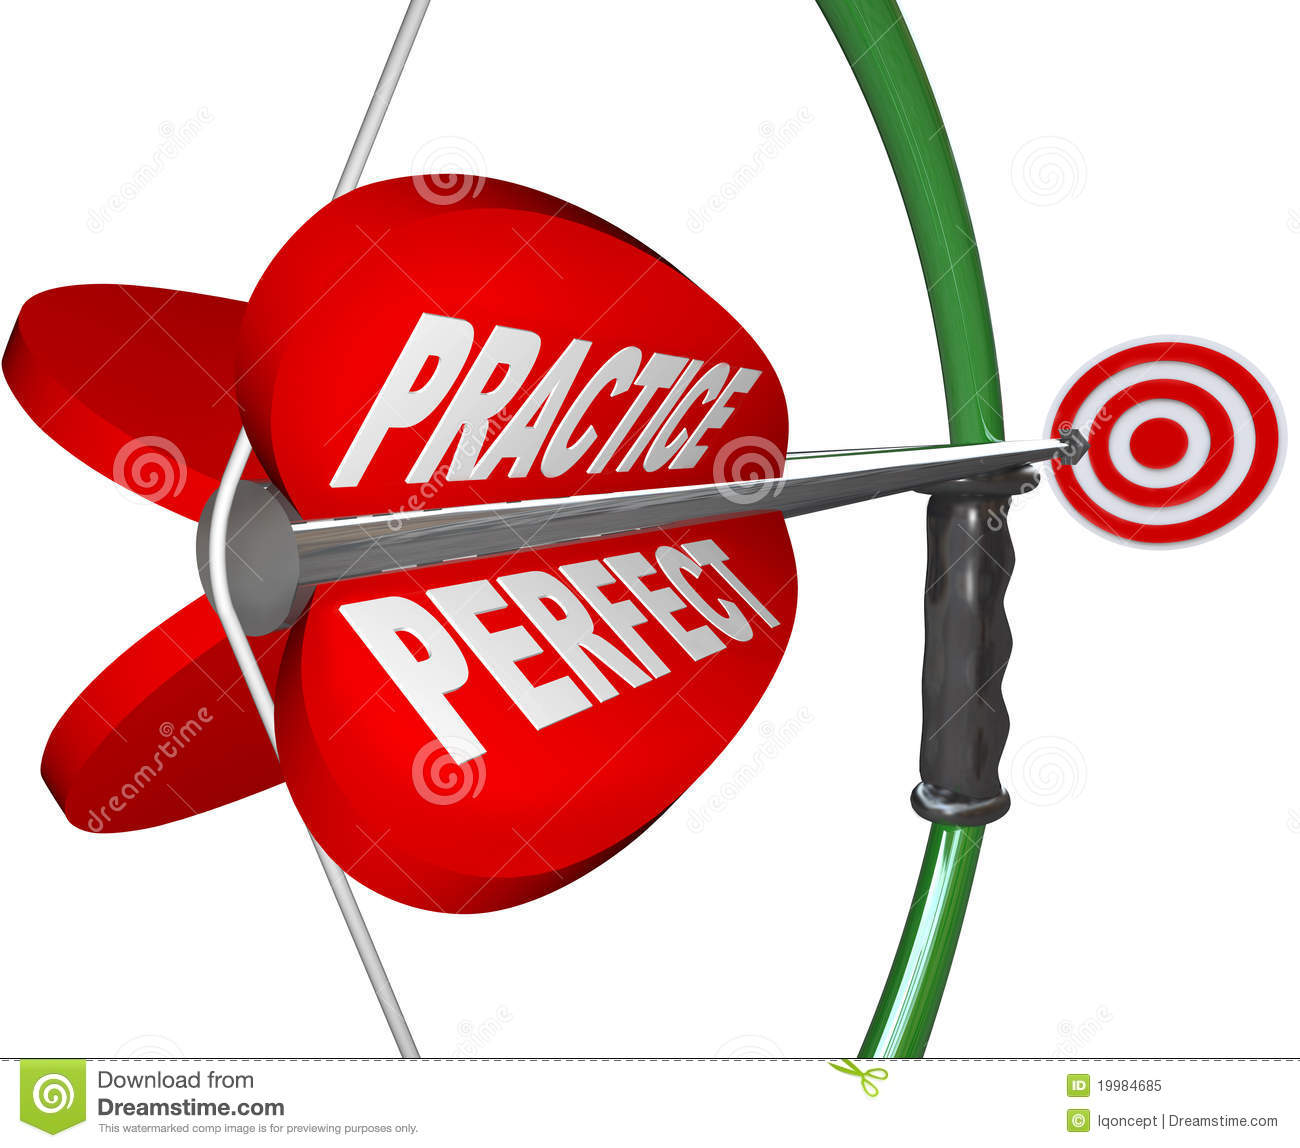 Practice Makes Perfect Bow And Arrow Royalty Free Stock Photo   Image    